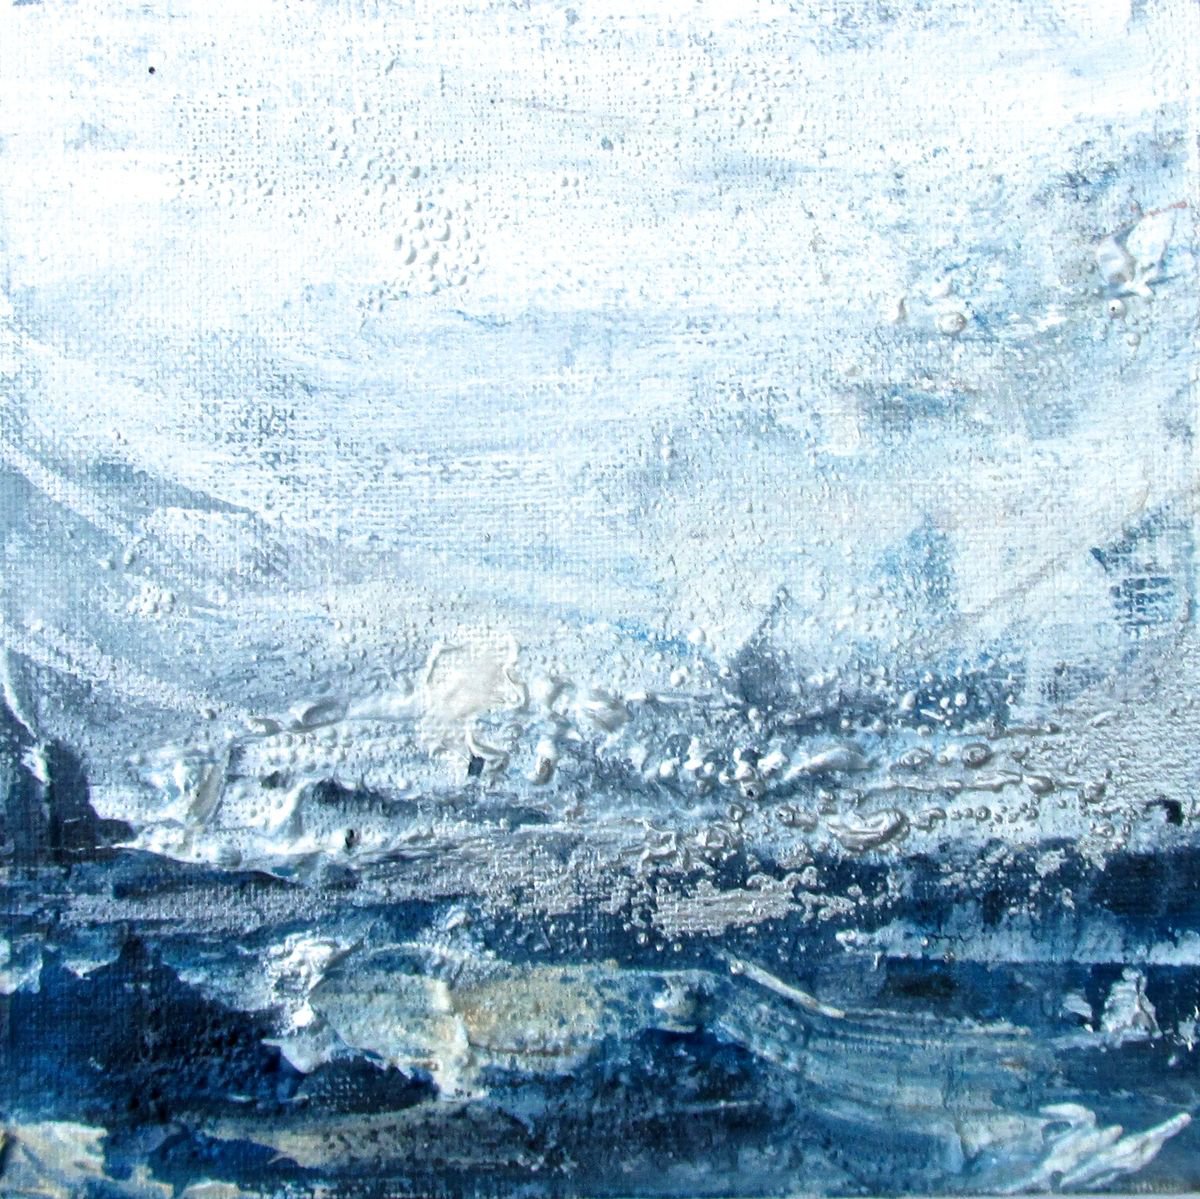 Stormy Seas 3 by Laura Spring